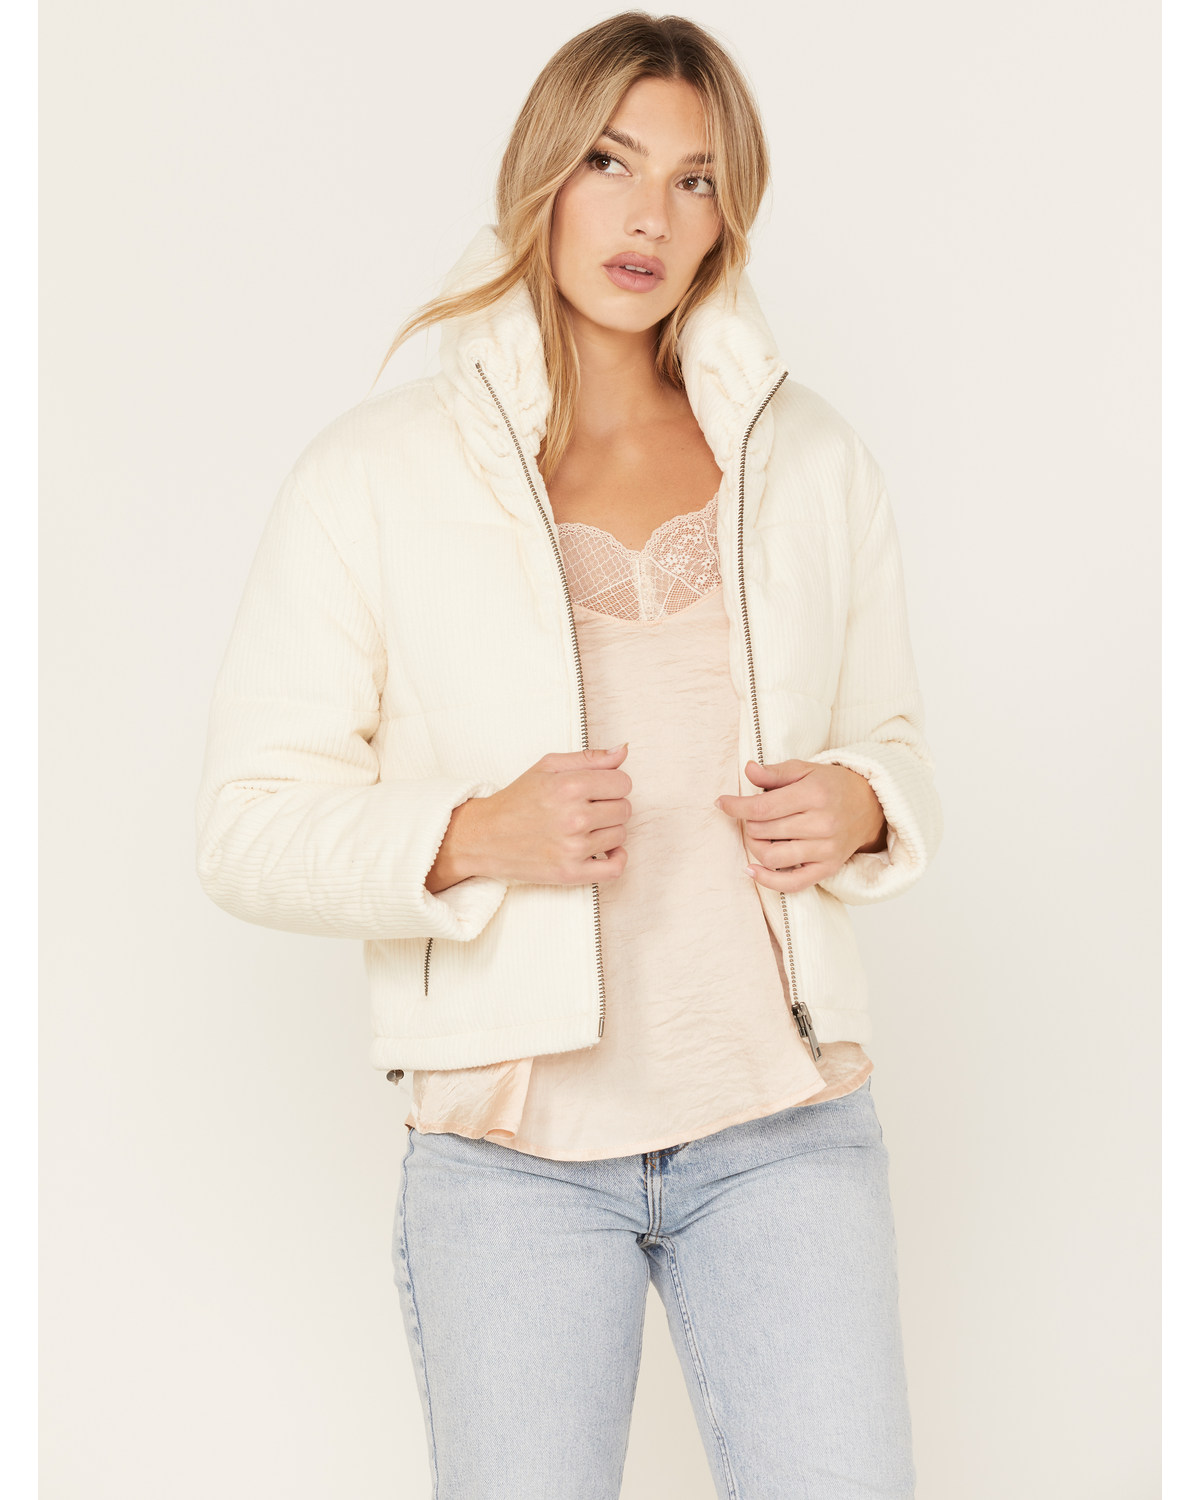 Cleo + Wolf Women's Quilted Corduroy Puffer Jacket